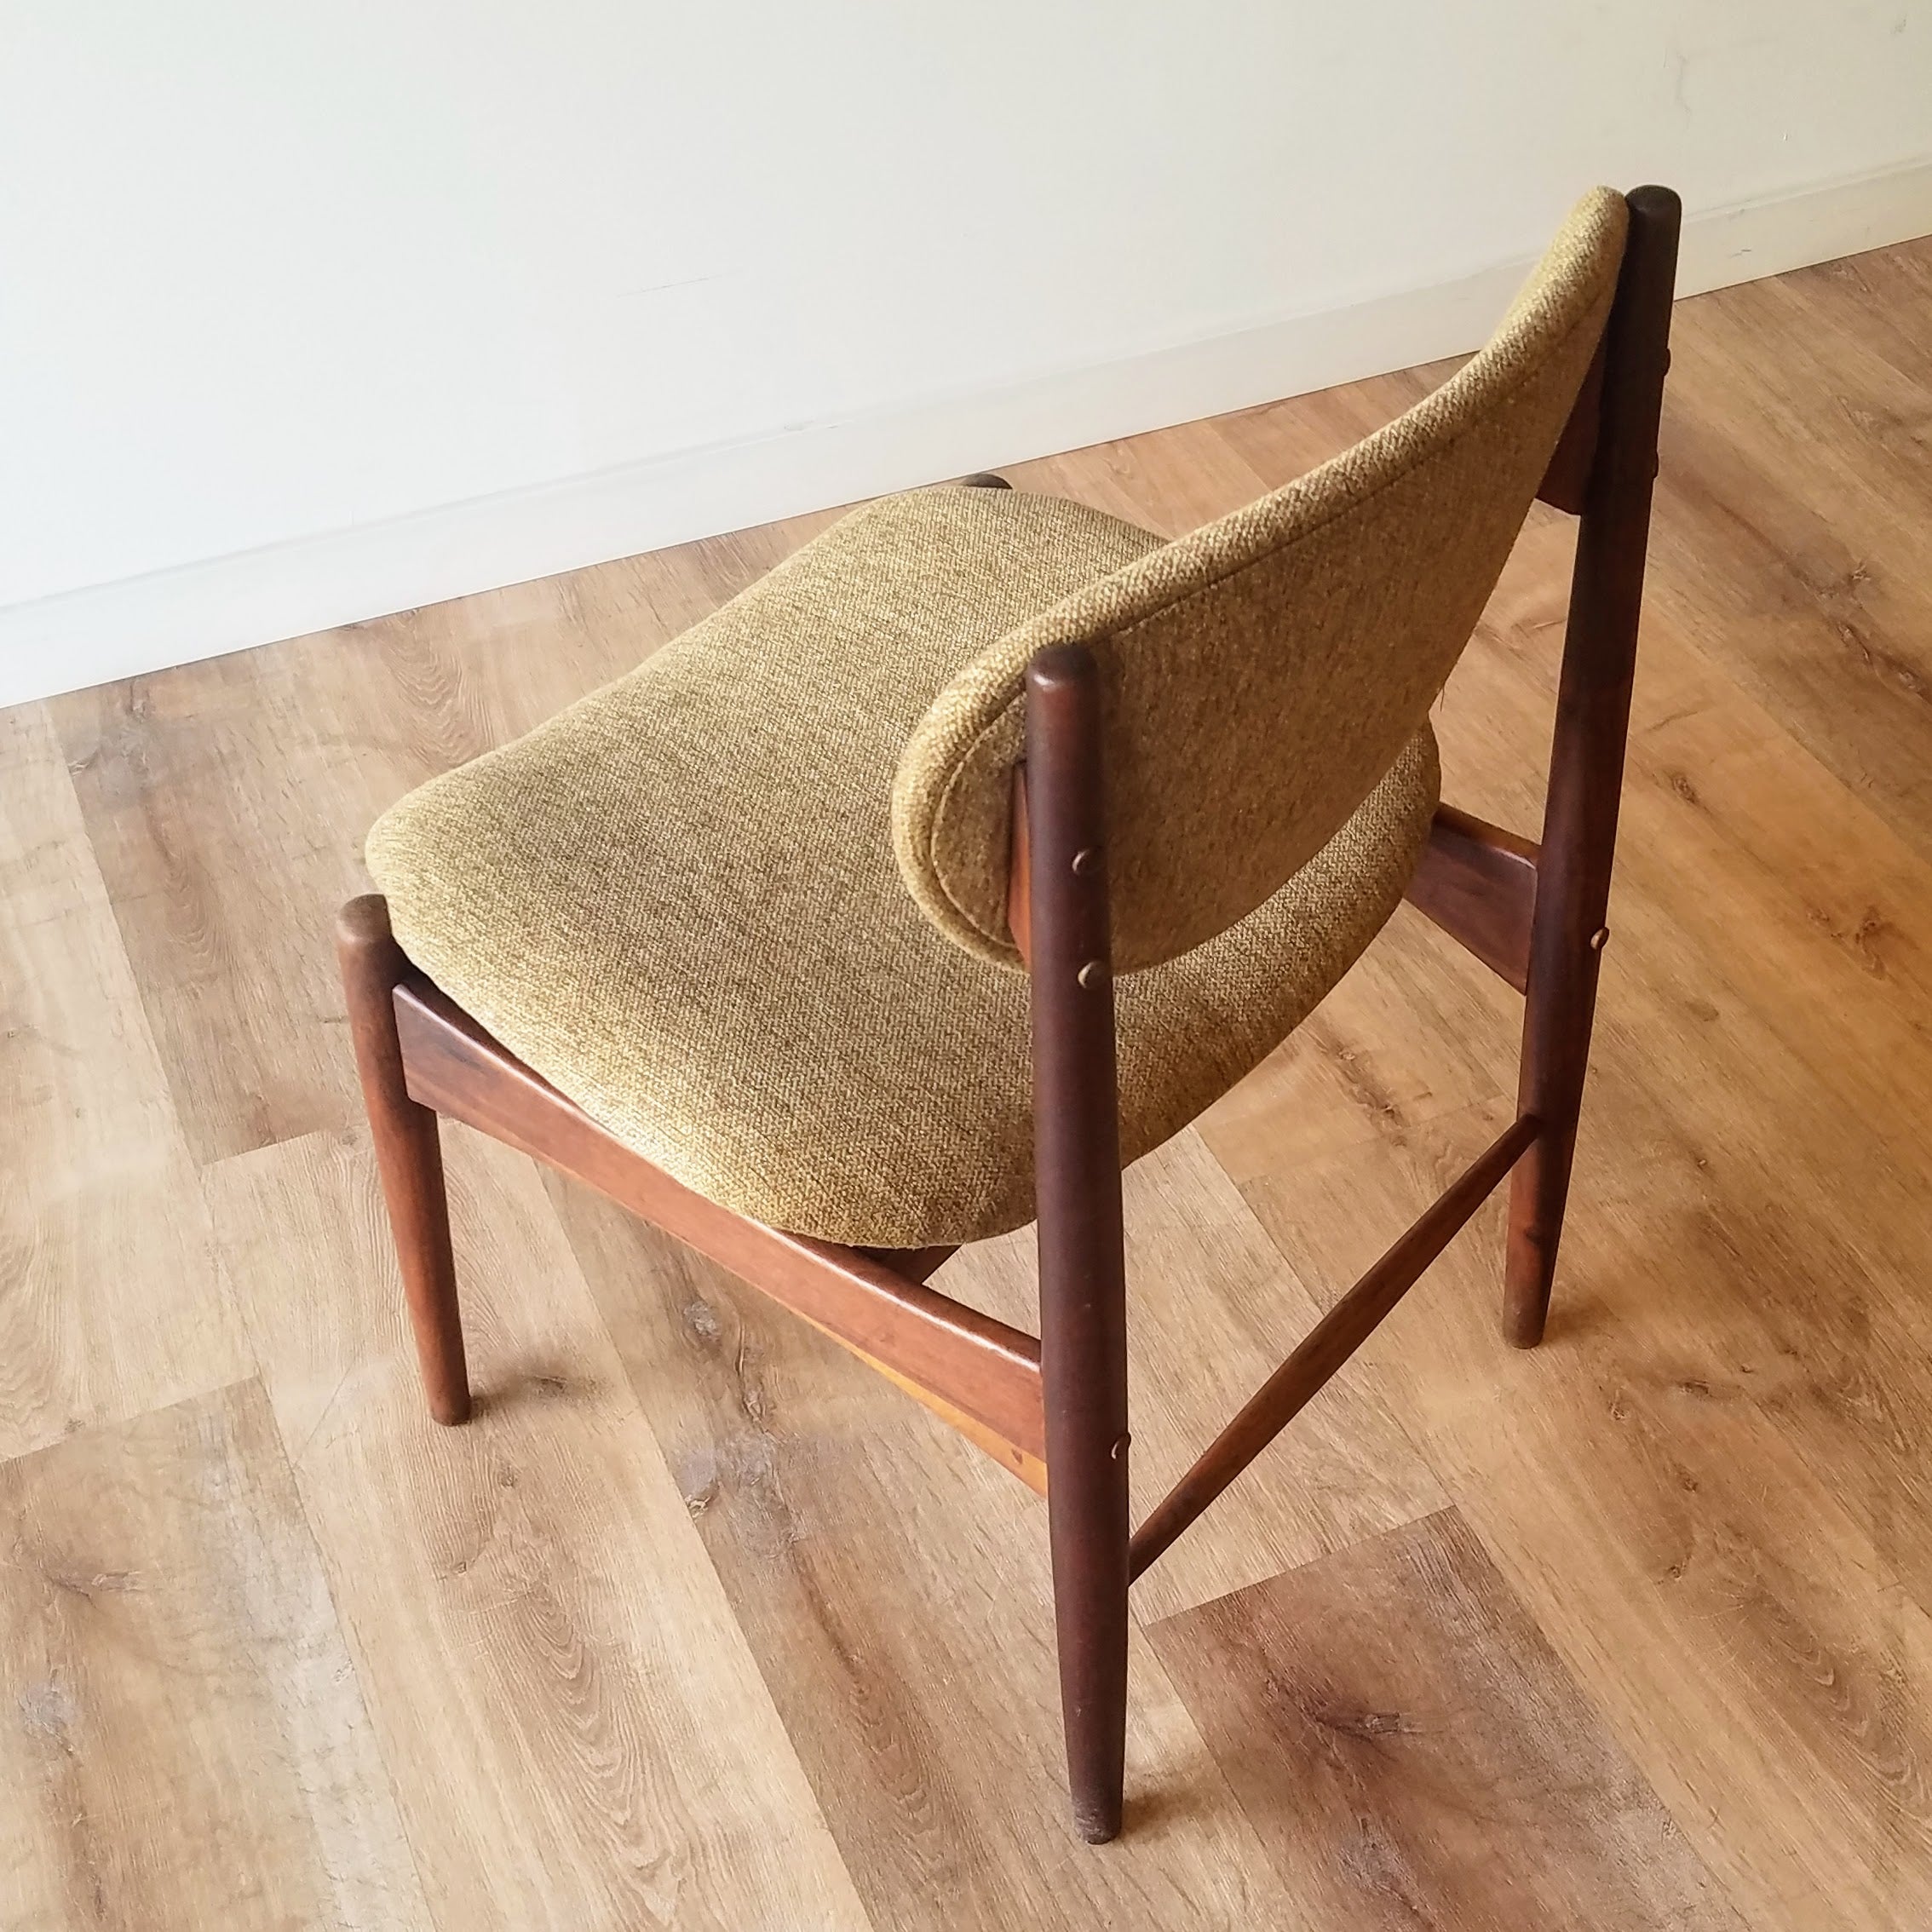 MCM Side Chair